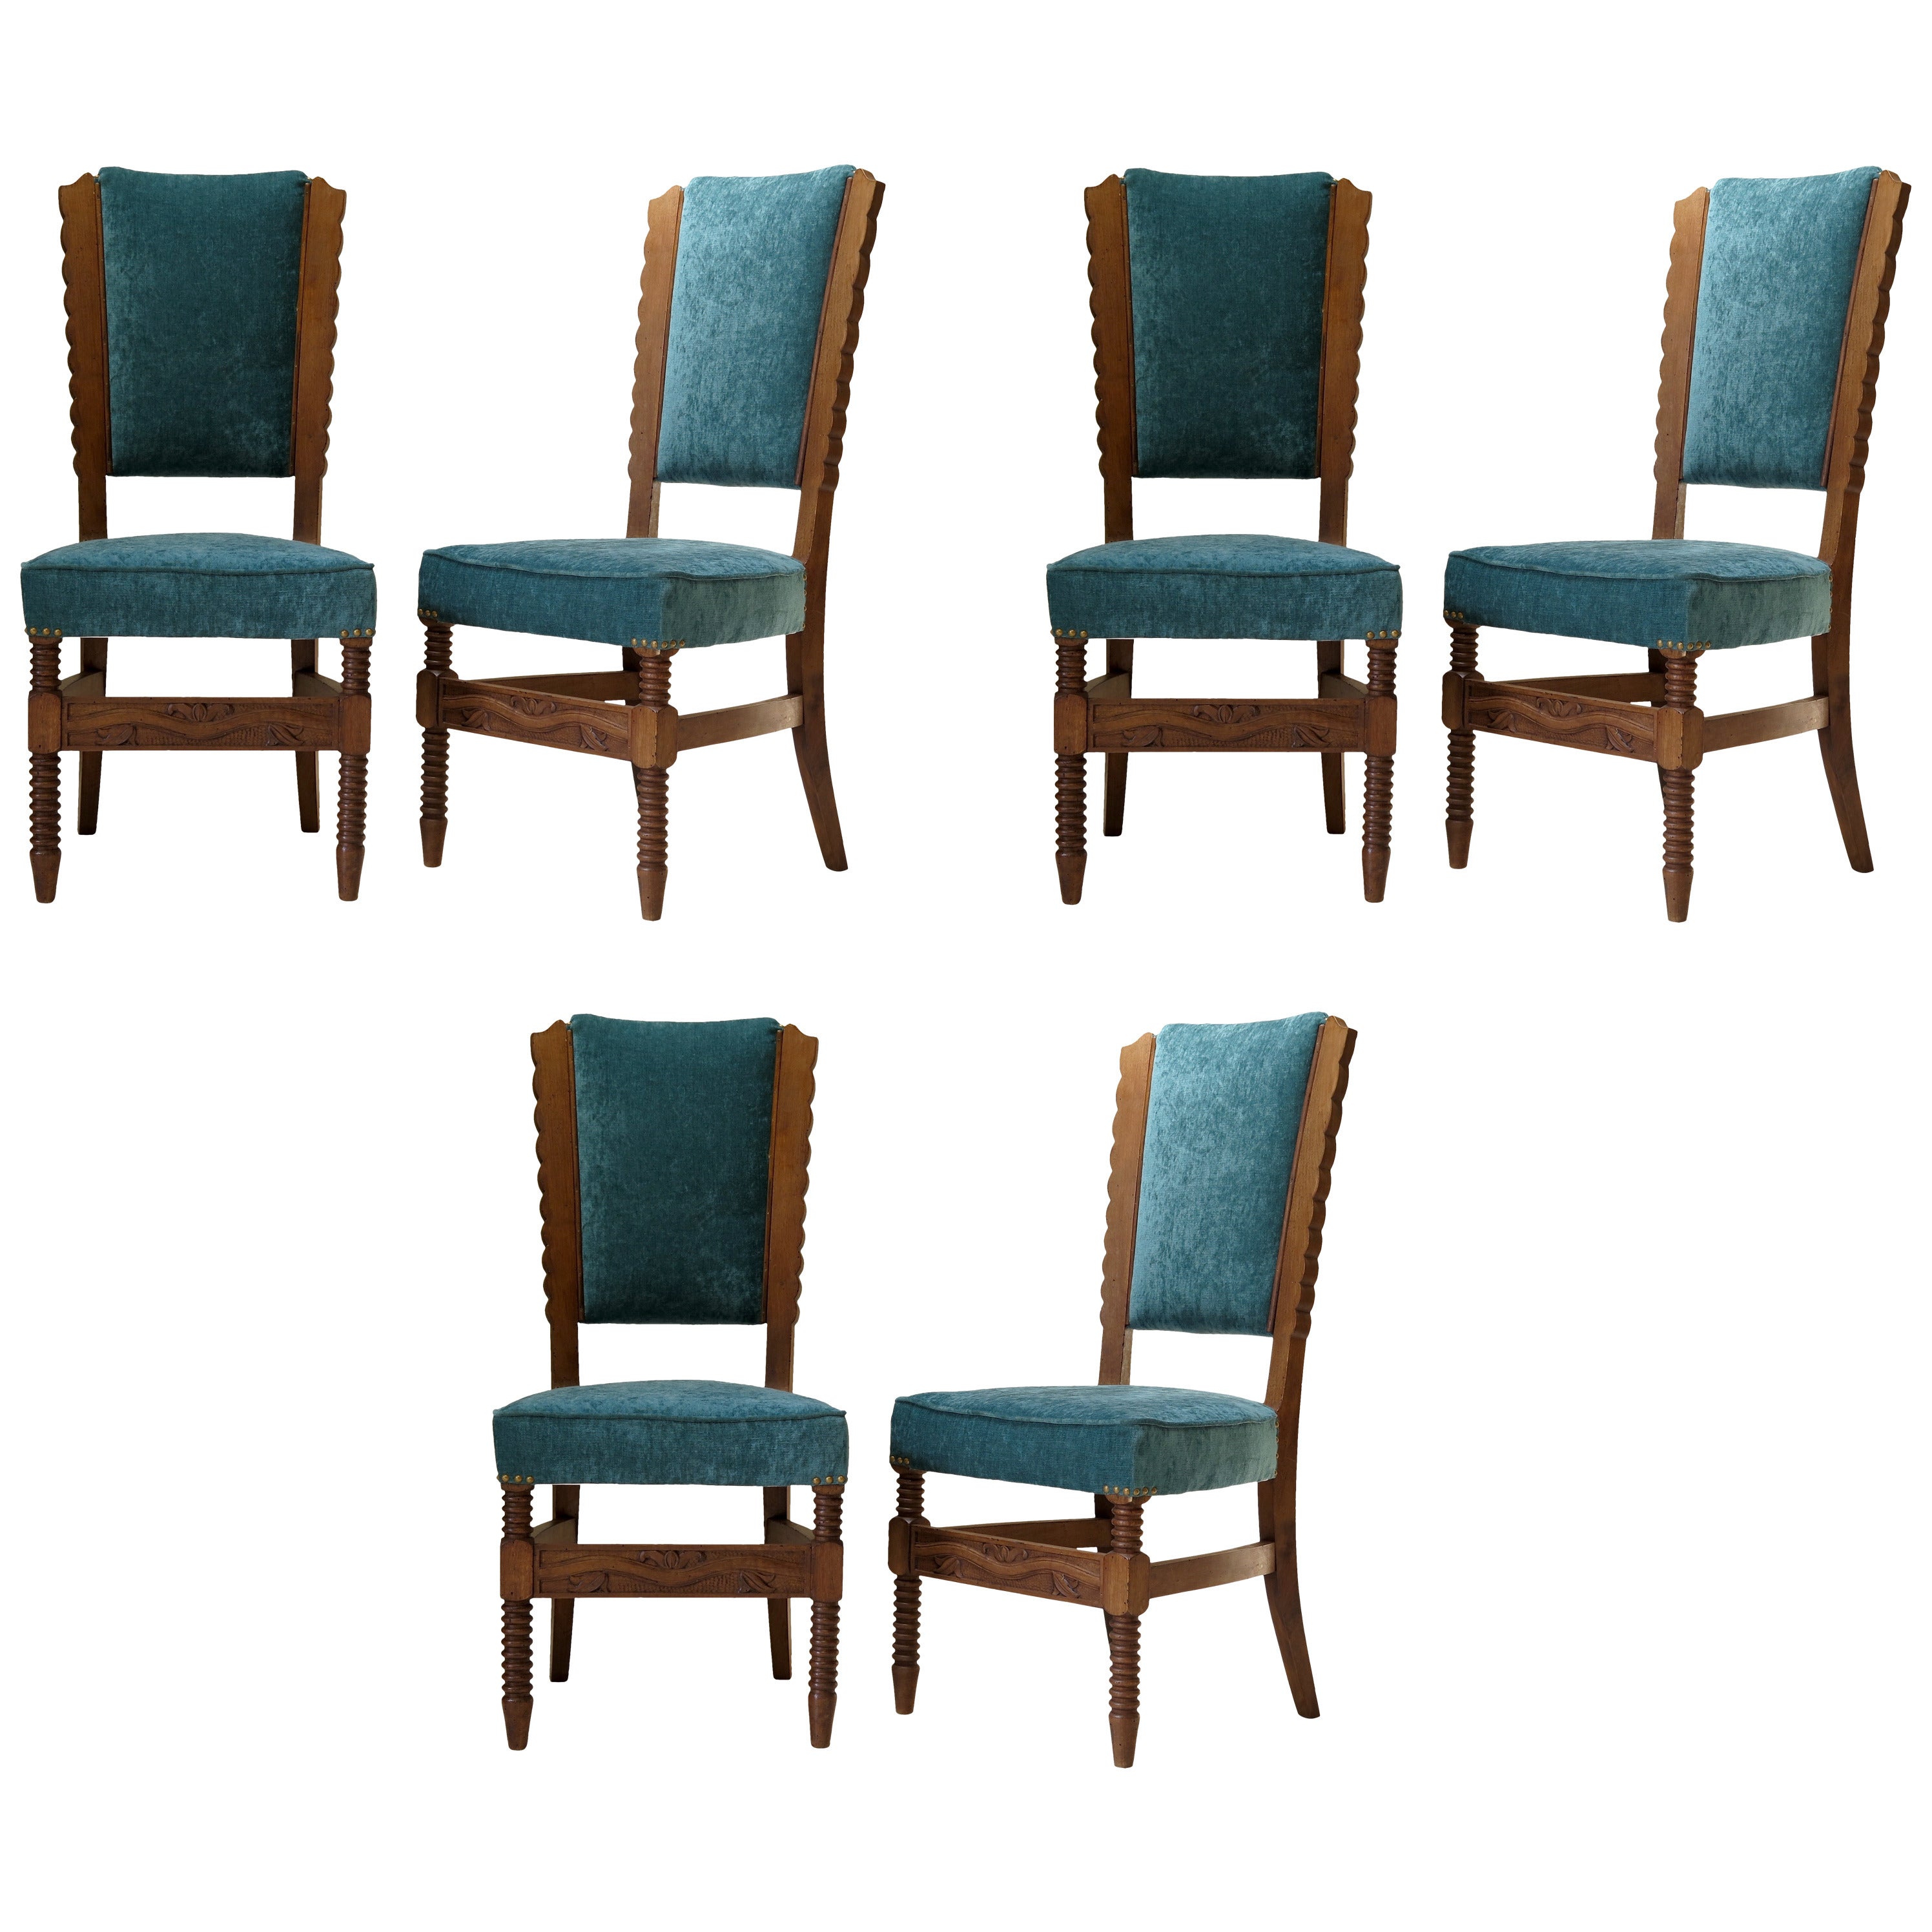 Set of 6 Art Deco Dining Chairs Attr. to Pier Luigi Colli - Italy, 1940s